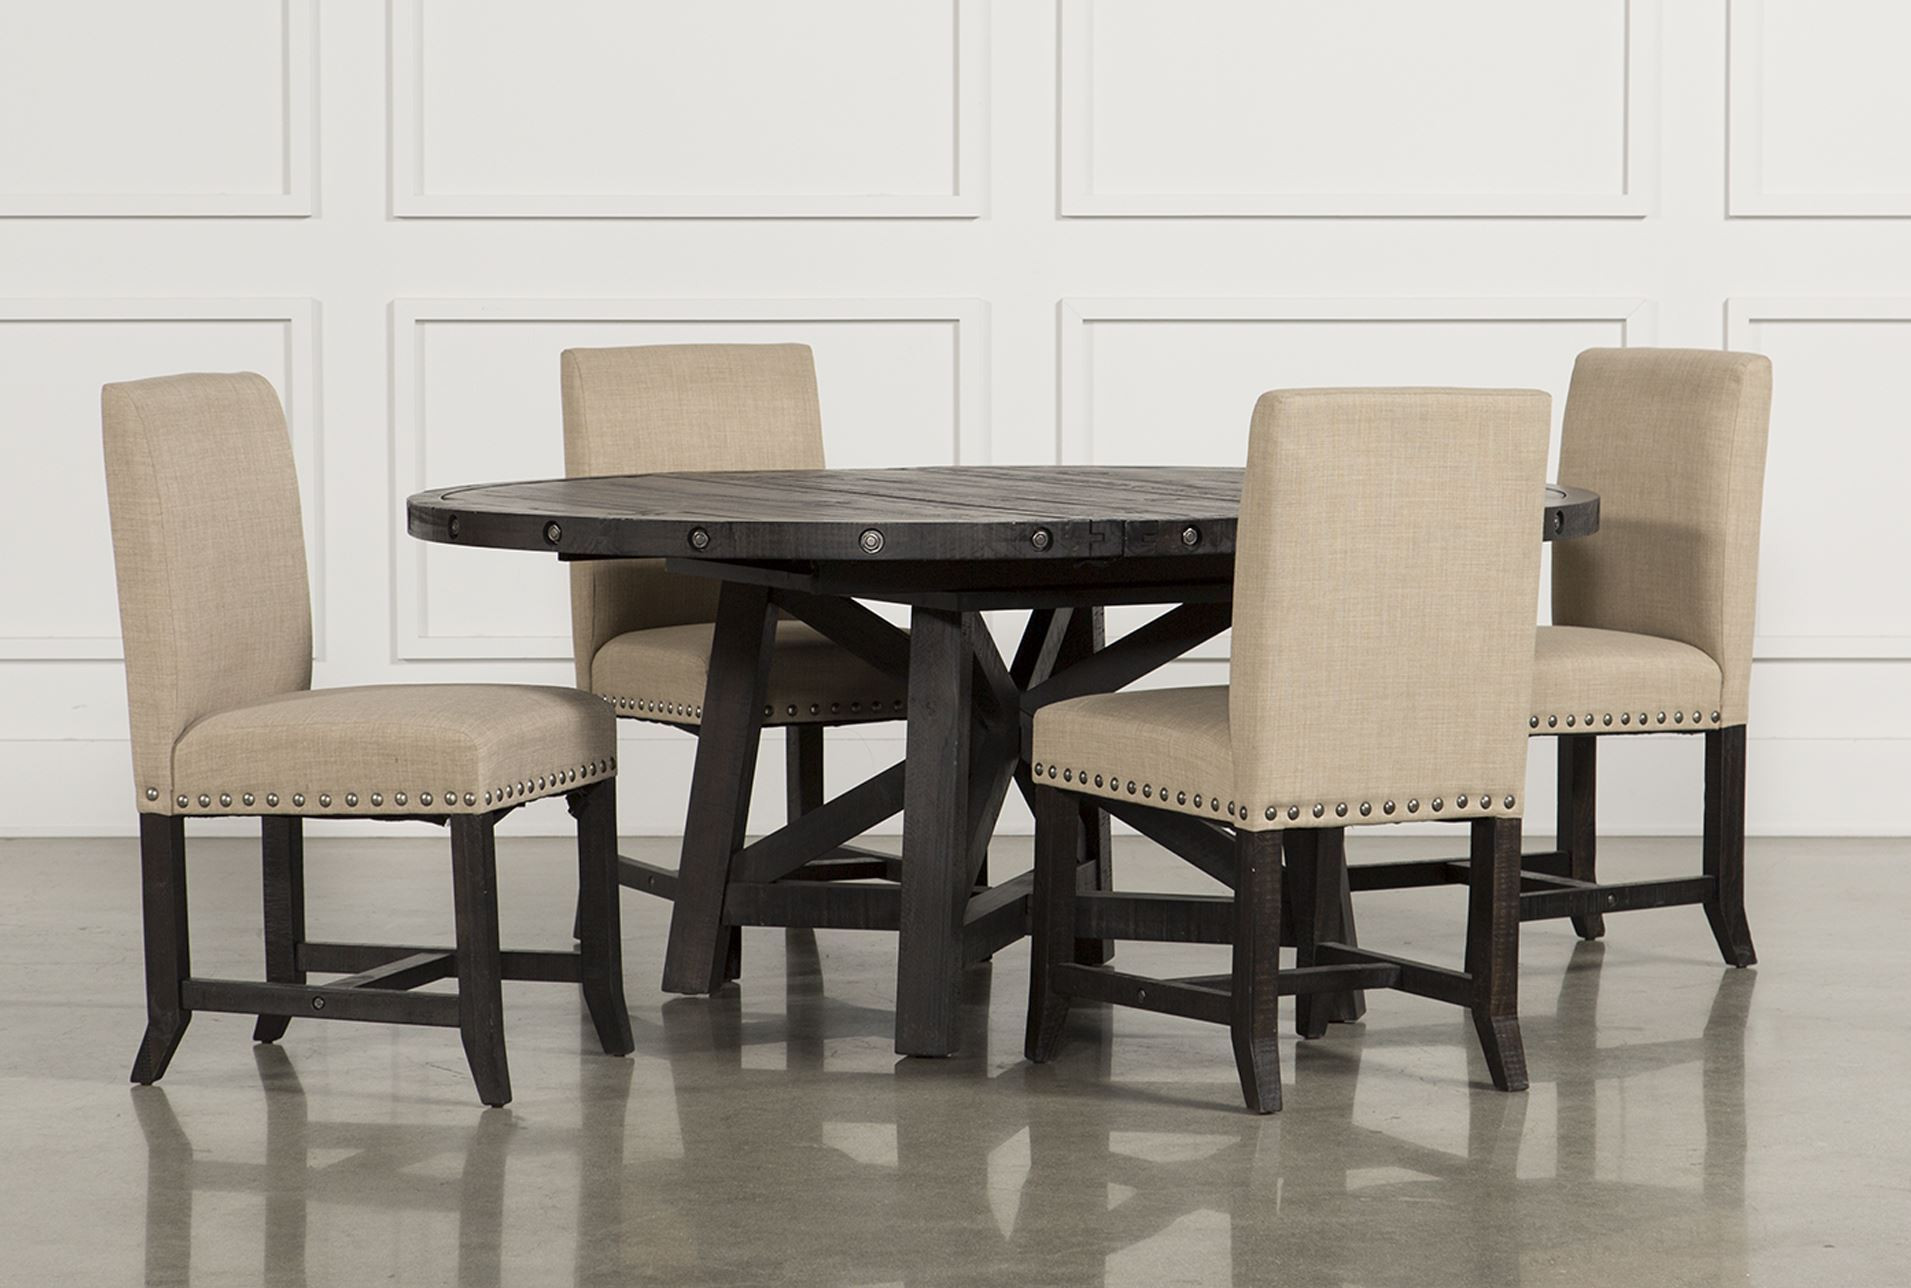 Living Spaces Dining Table
 Jaxon 5 Piece Round Dining Set W Upholstered Chairs